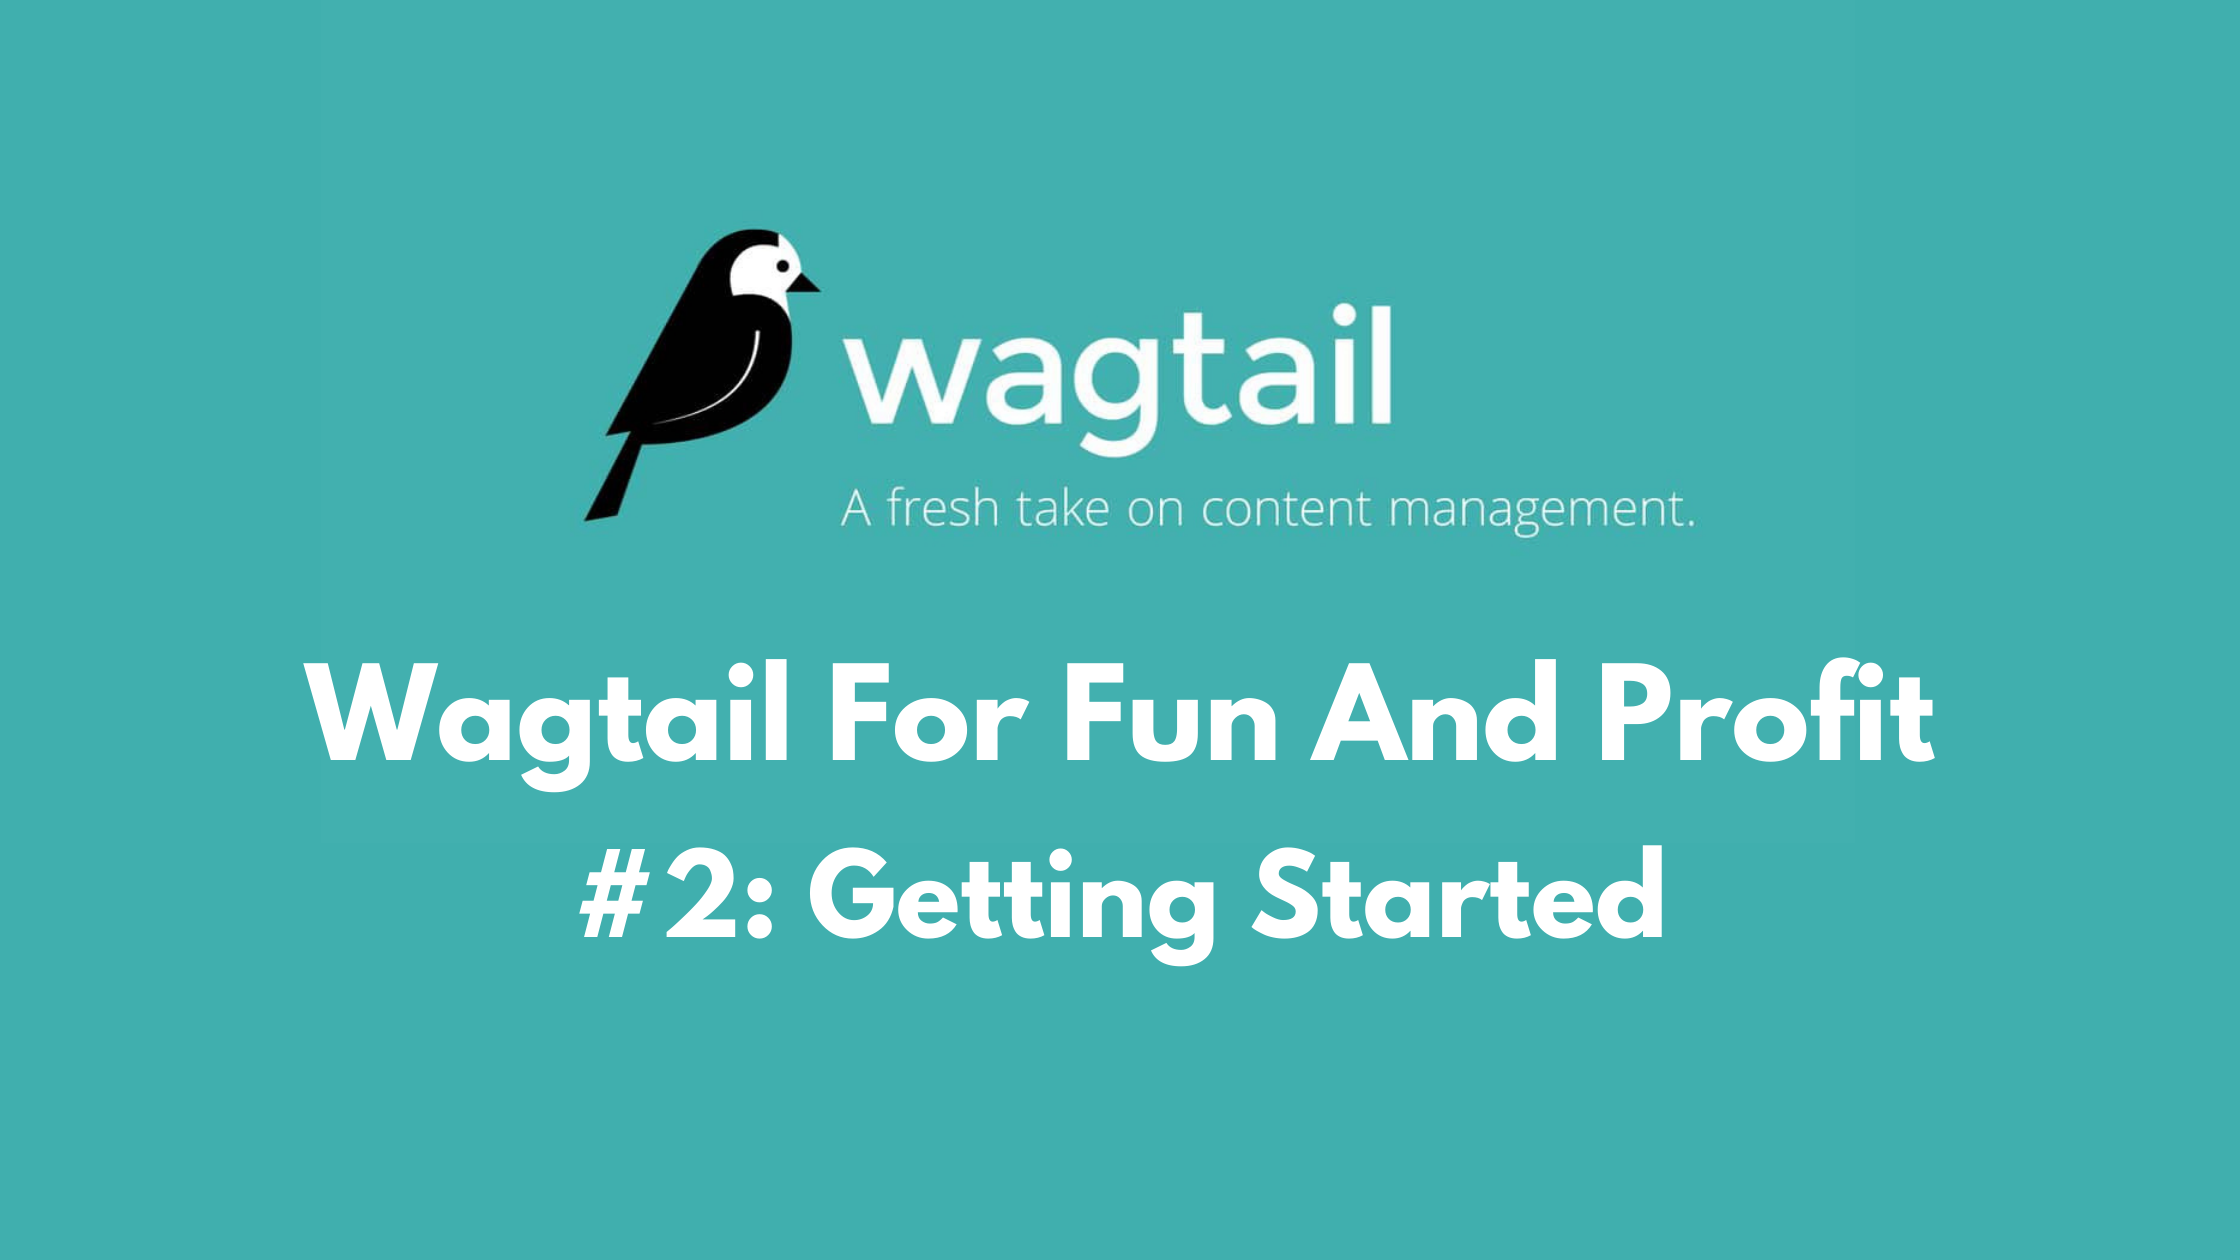 Wagtail For Fun And Profit #2 - Getting Started